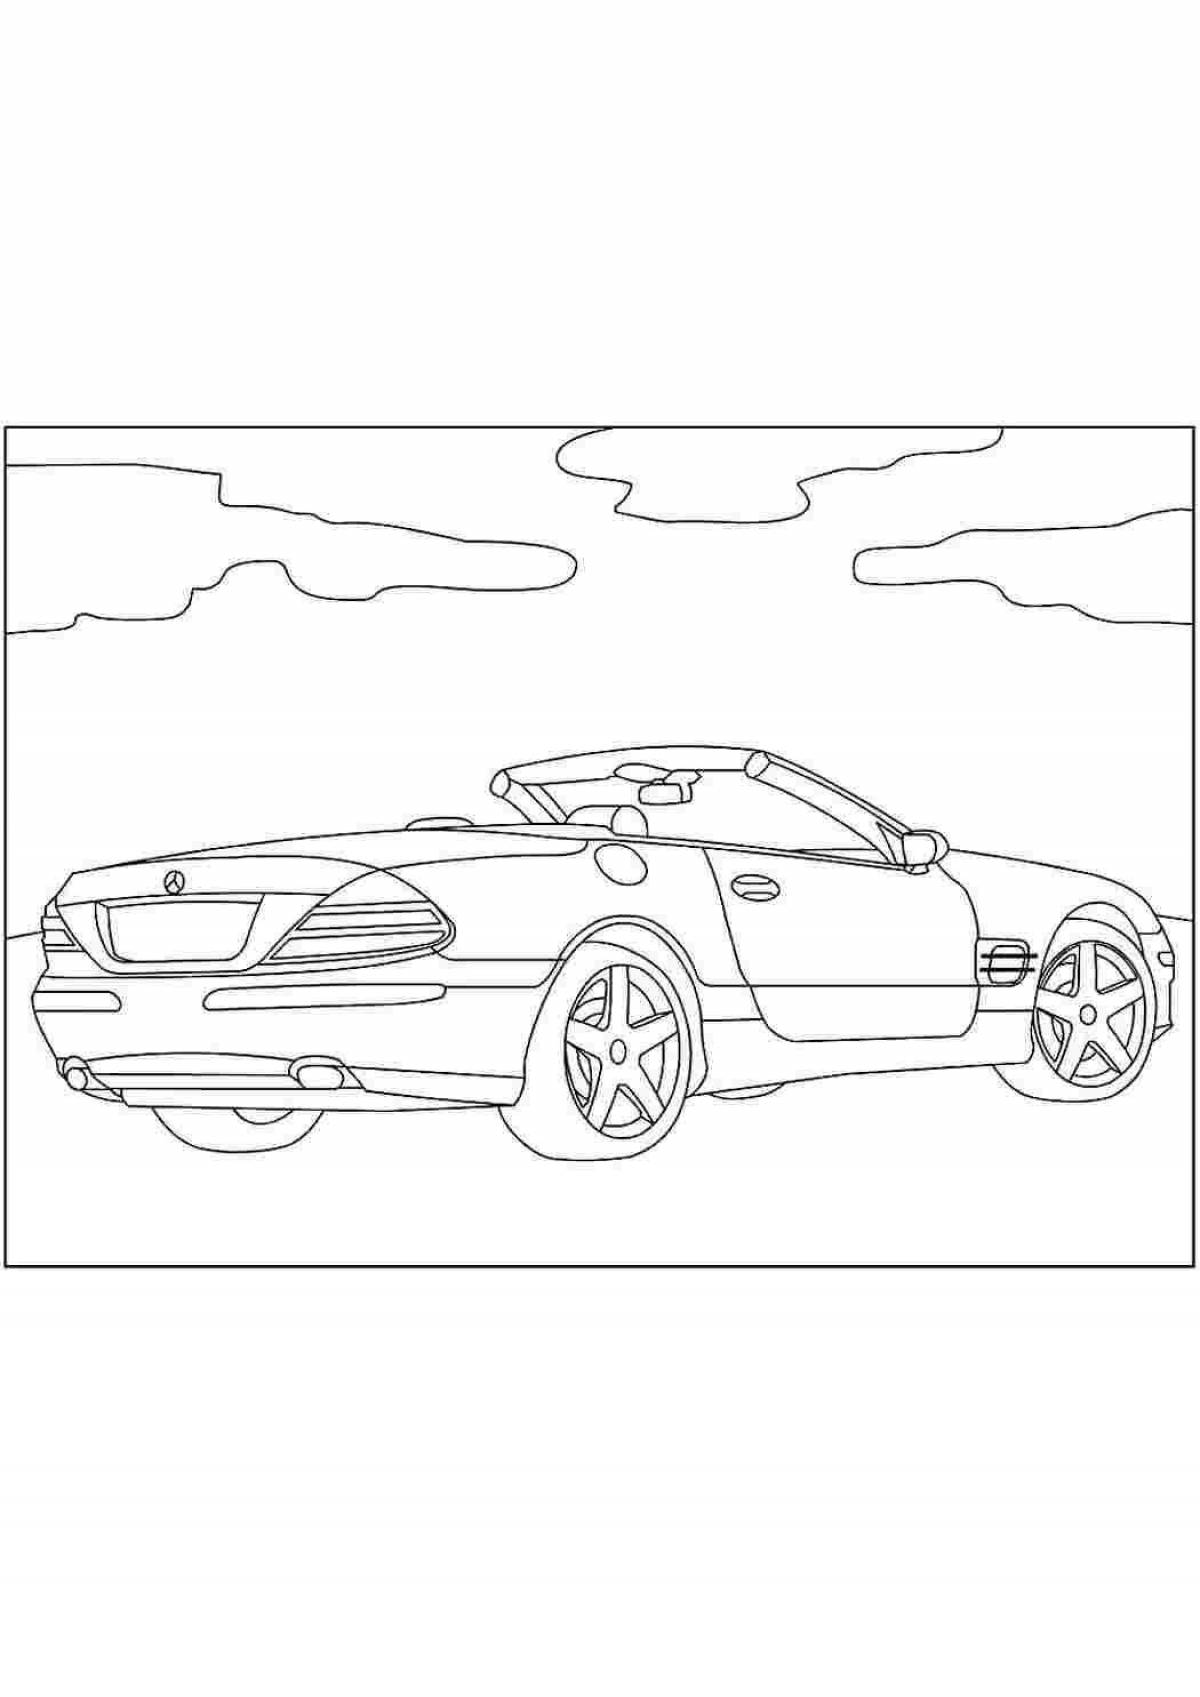 Merry Mercedes coloring book for boys